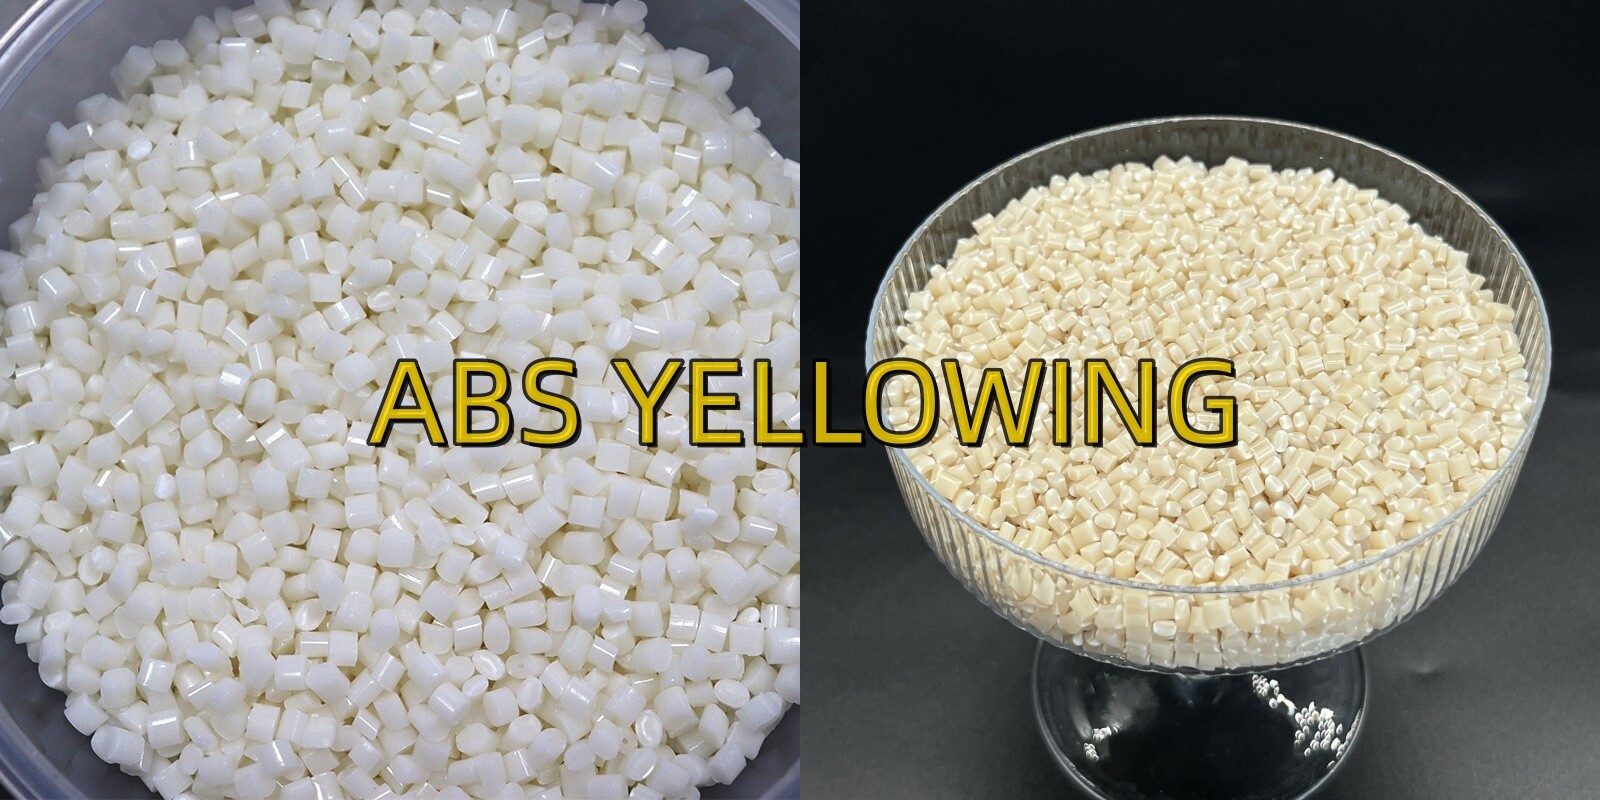 Understanding the Yellowing of ABS Plastic and Ways to Address It